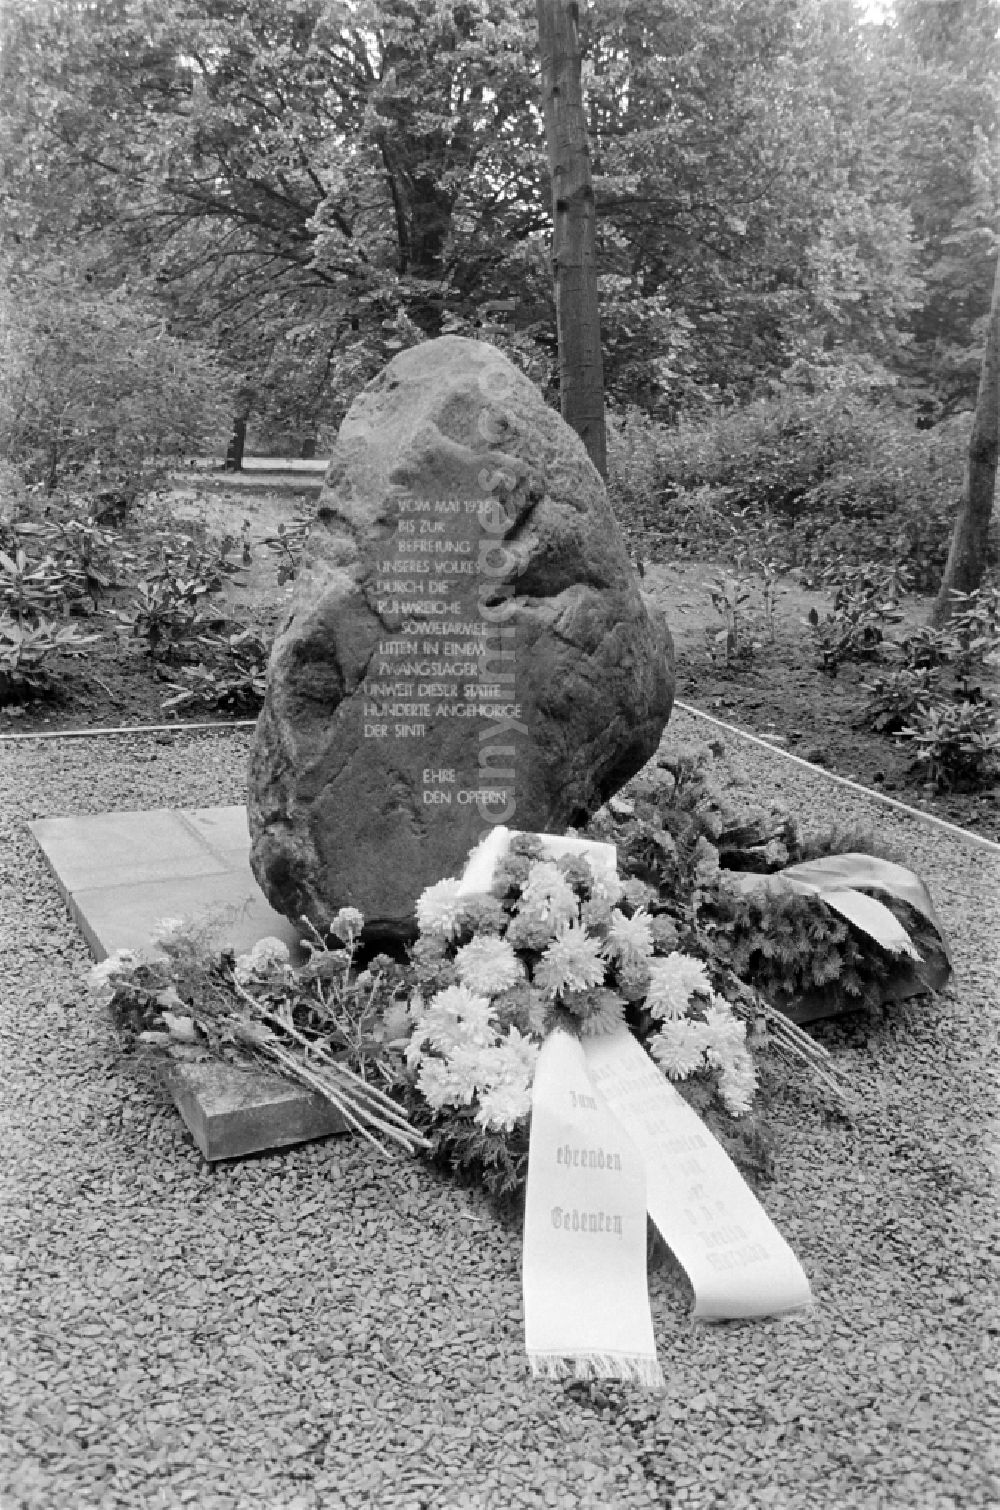 GDR image archive: Berlin - Participants at the inauguration of the memorial for the Sinti victims at the Marzahner Parkfriedhof in Berlin on the territory of the former GDR, German Democratic RepublicGedenkstaette